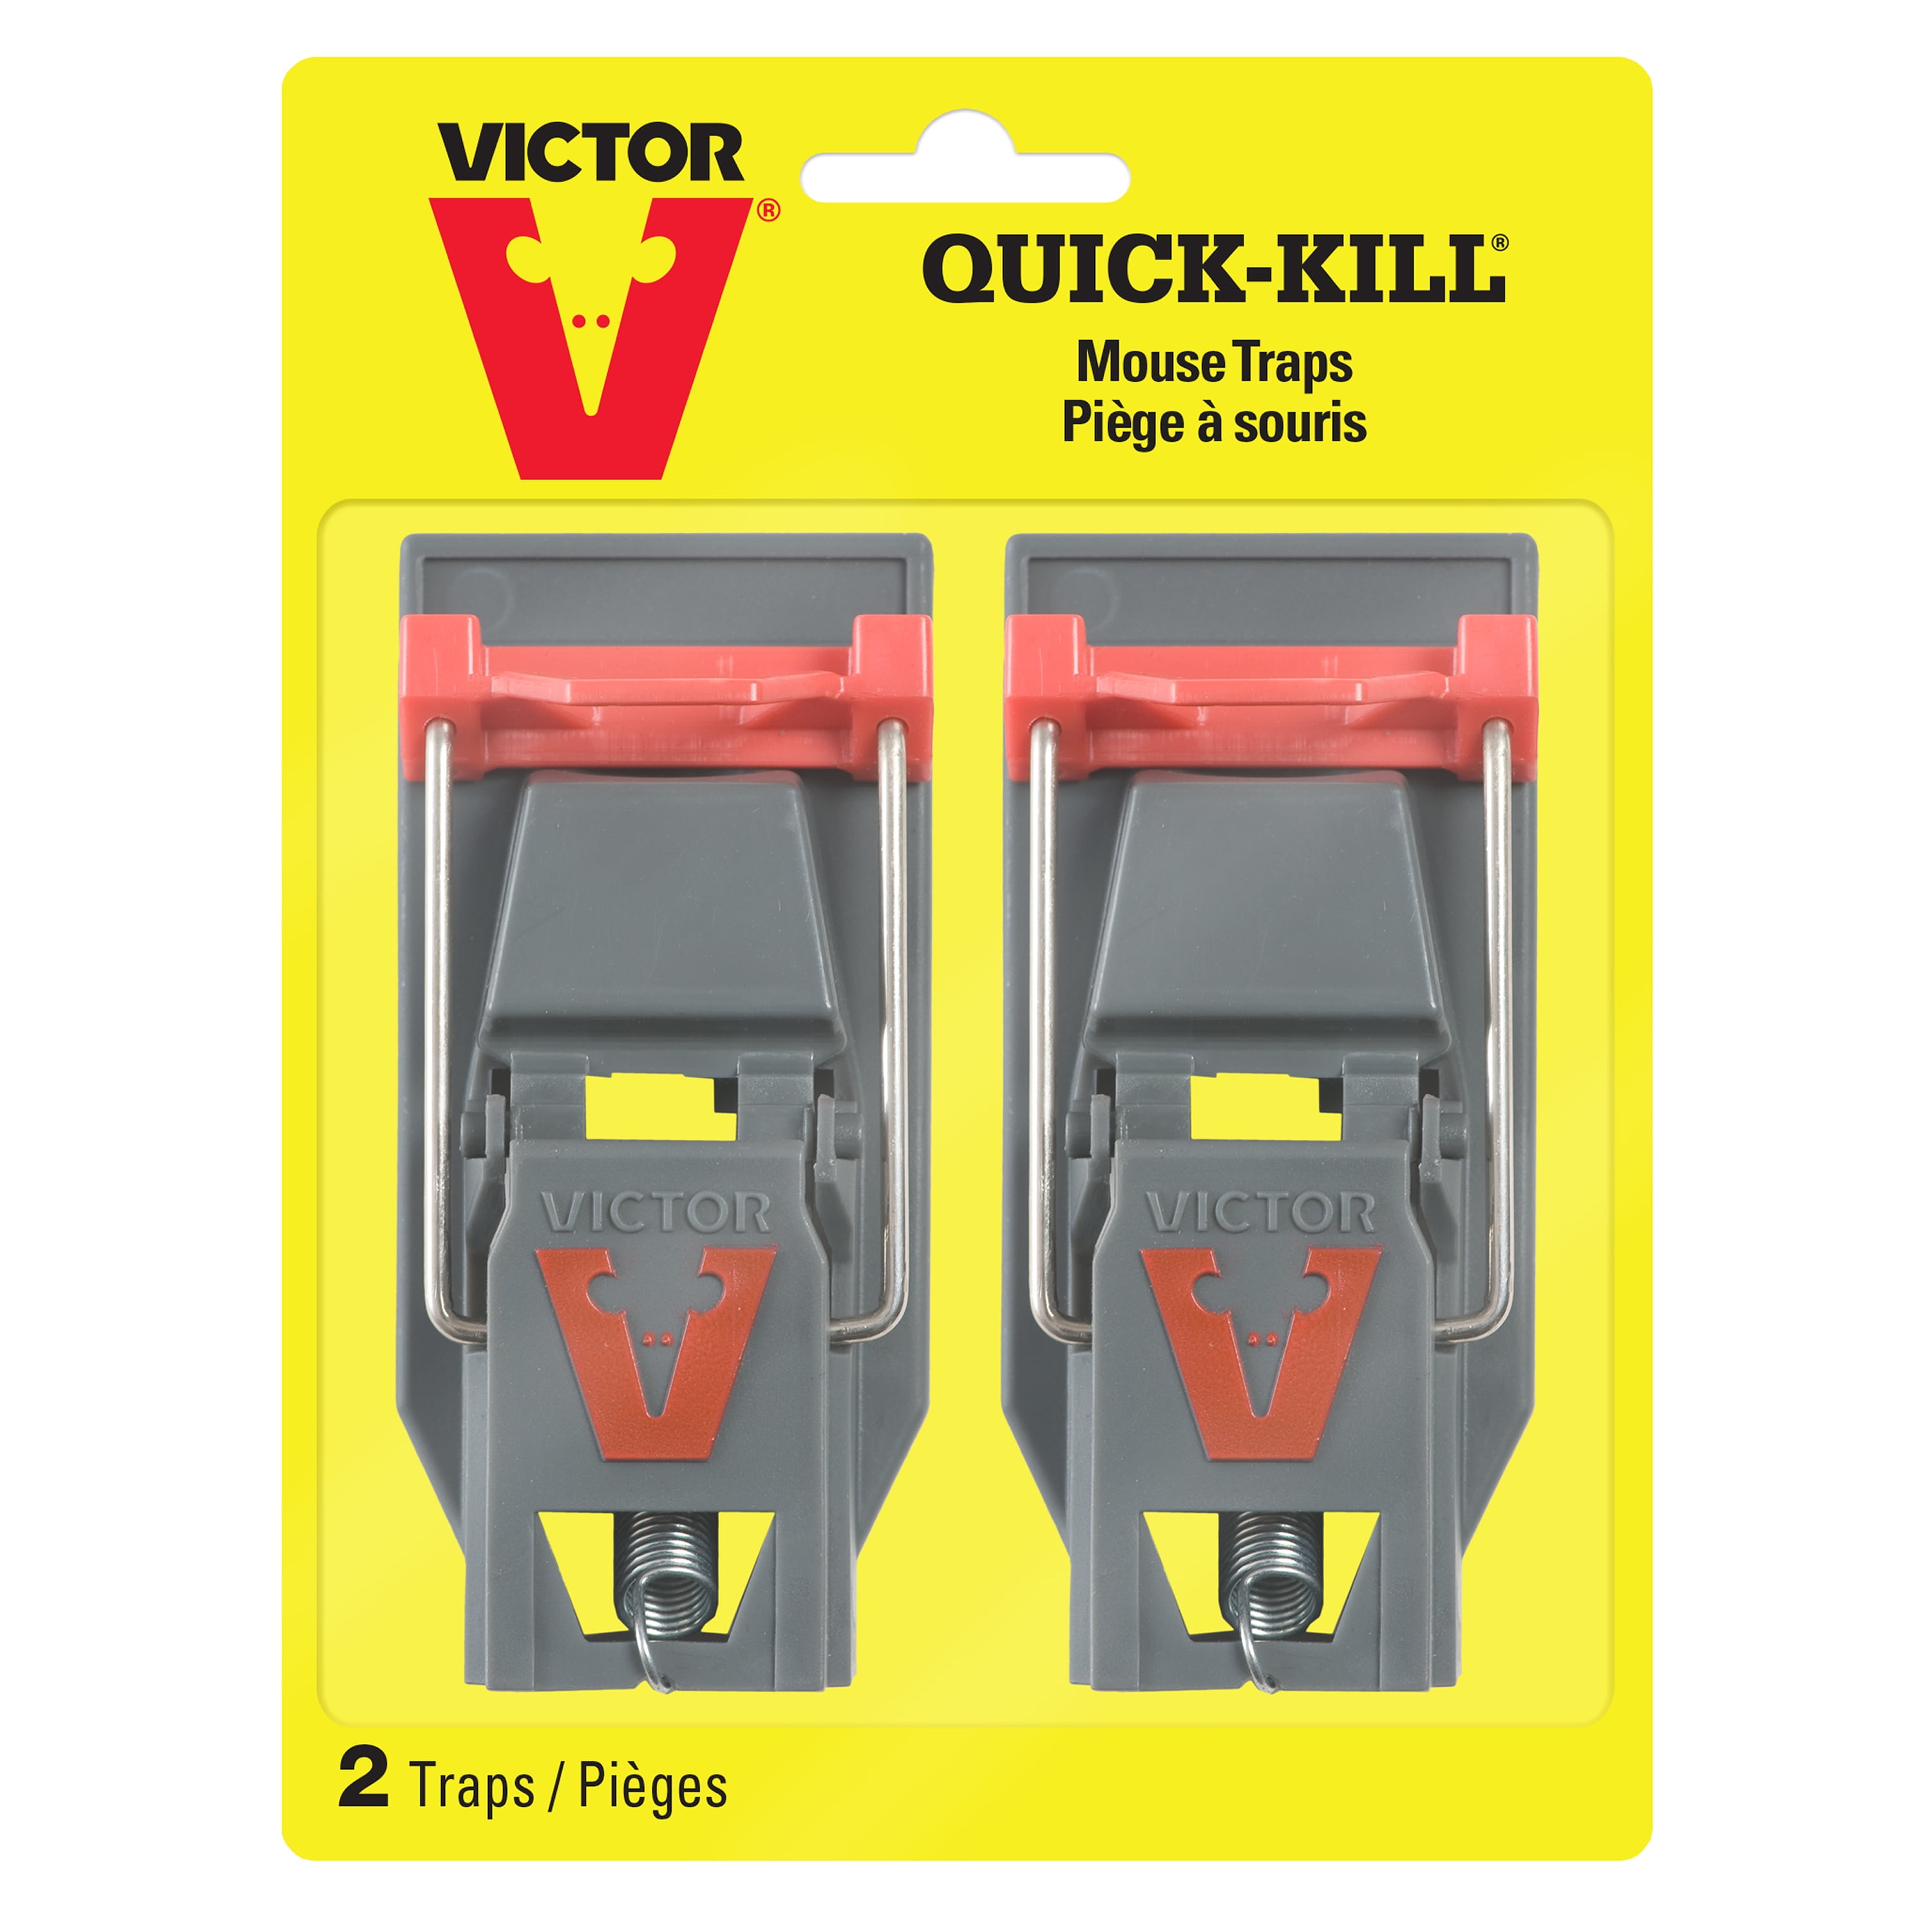 8 Packs VICTOR Easy Set Mouse Trap w/ Cheese Kills Mice trap M035 16 Traps 